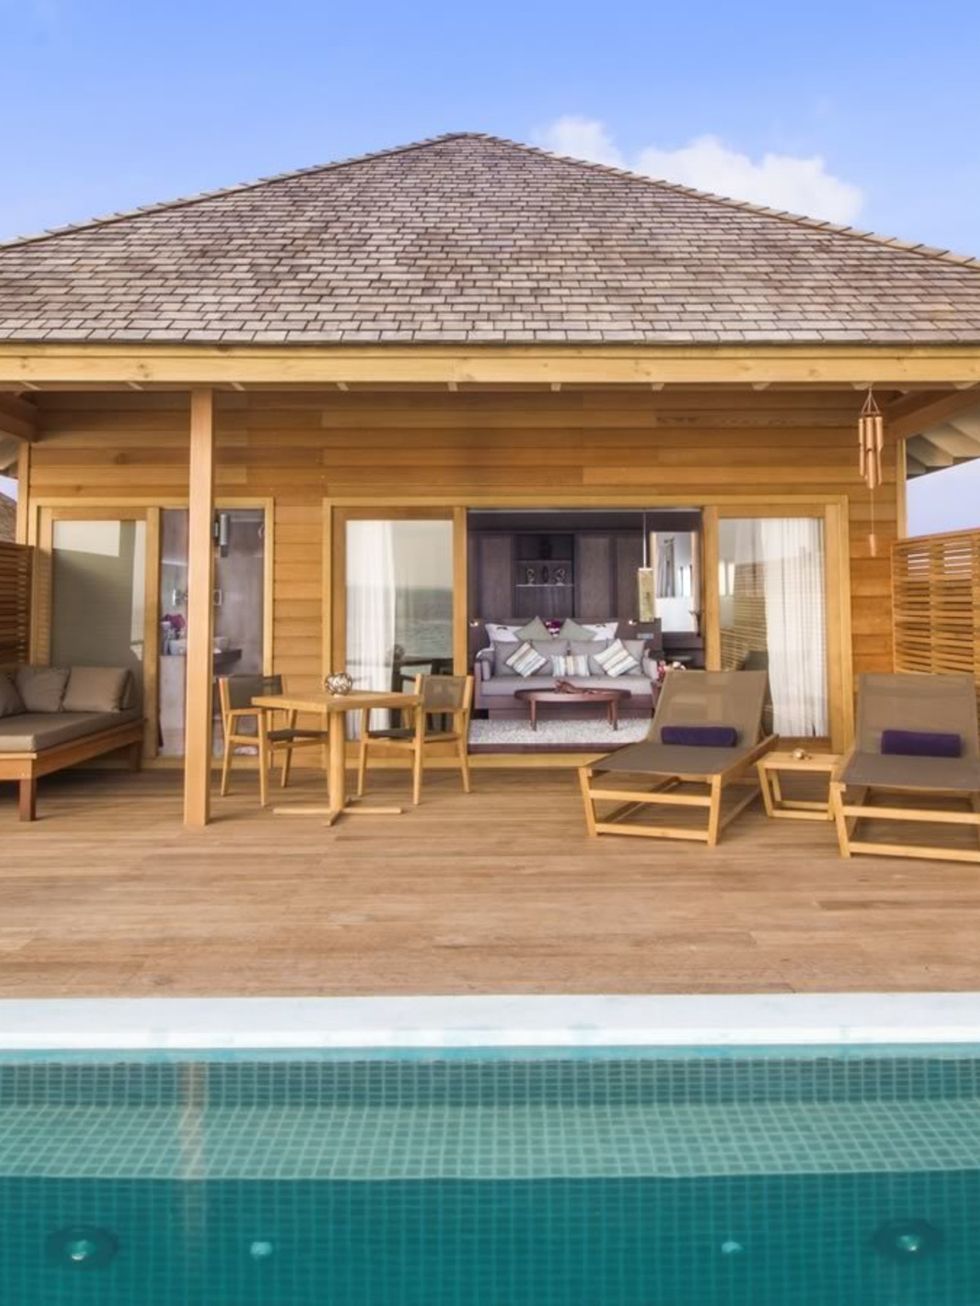 Swimming pool, Property, Real estate, Roof, House, Chair, Resort, Home, Outdoor furniture, Shade, 